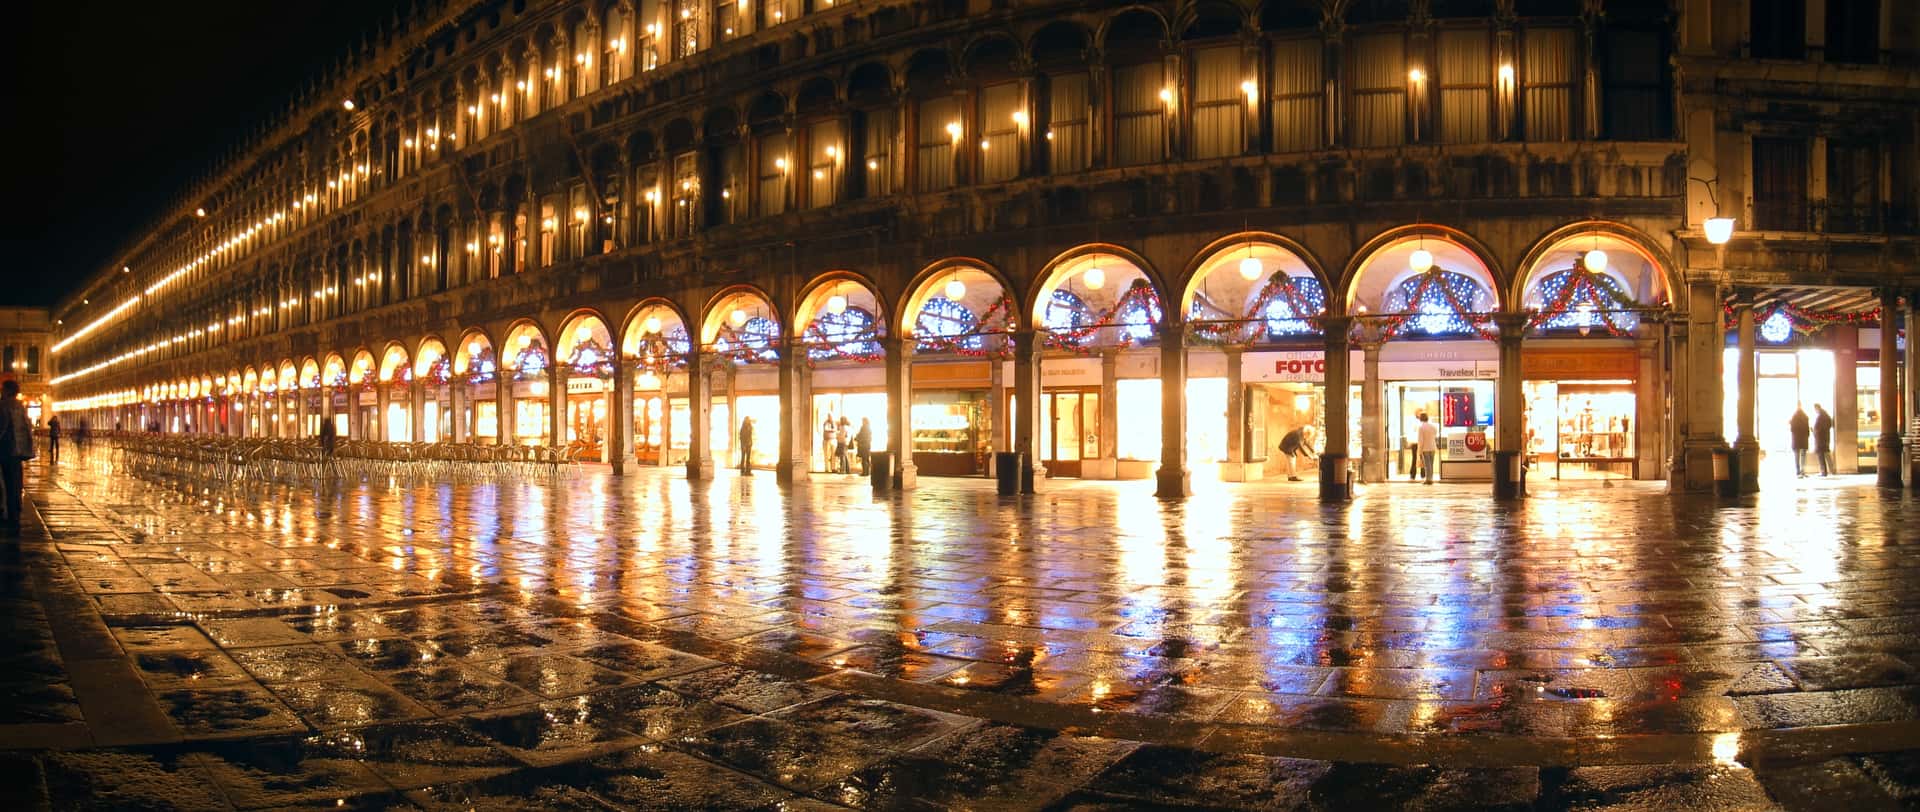 Piazza San Marco reflecting Christmas lights in the rain